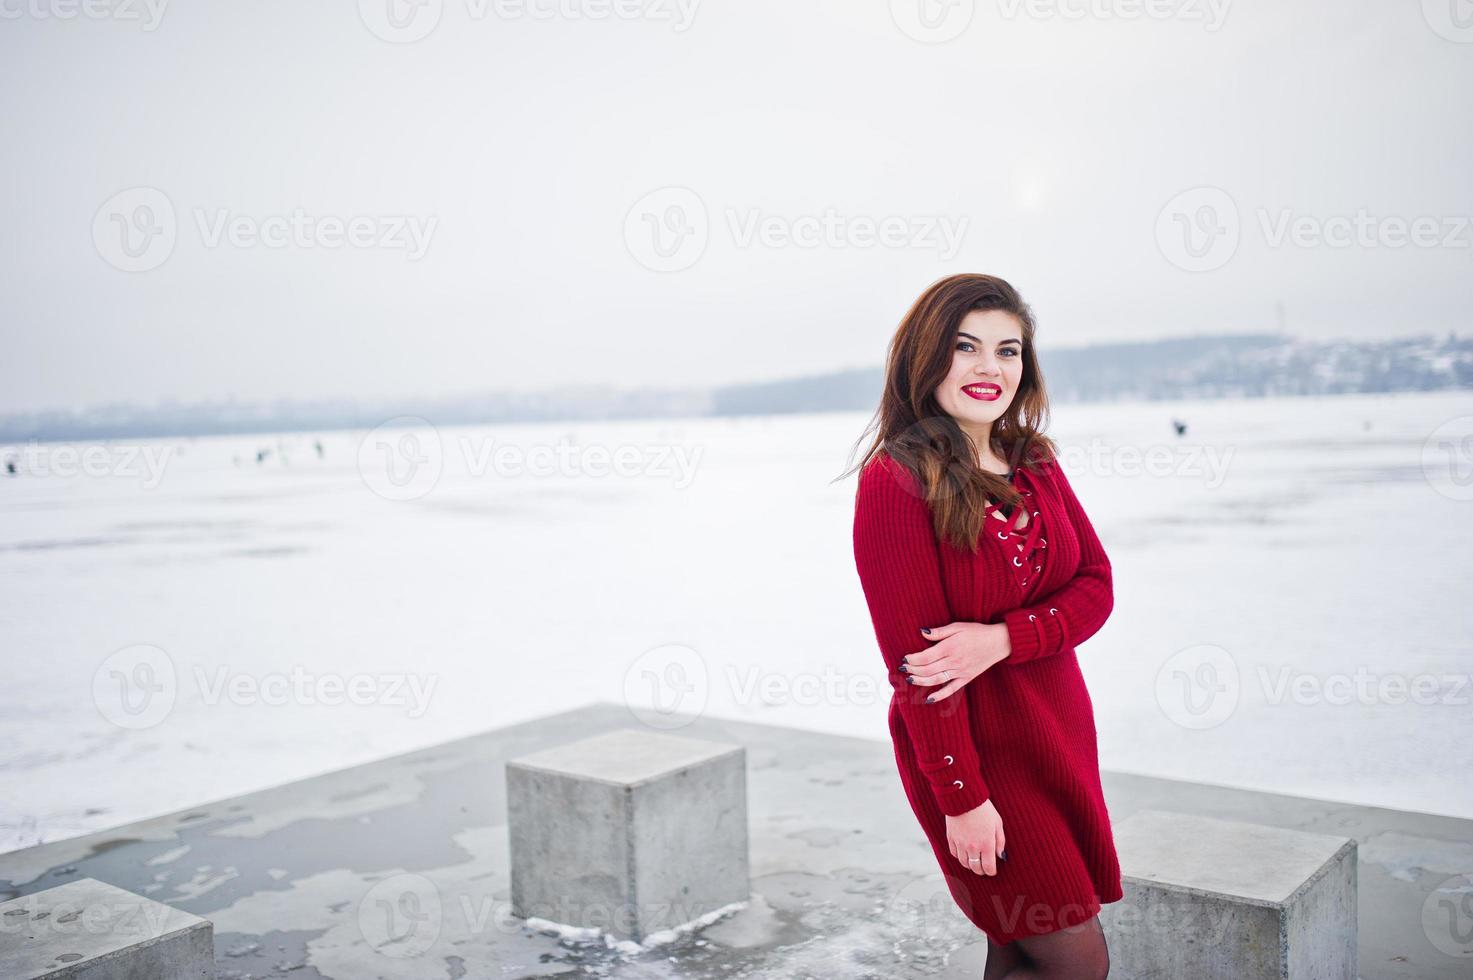 Brunette plus size model at red against frozen lake on winter day. photo